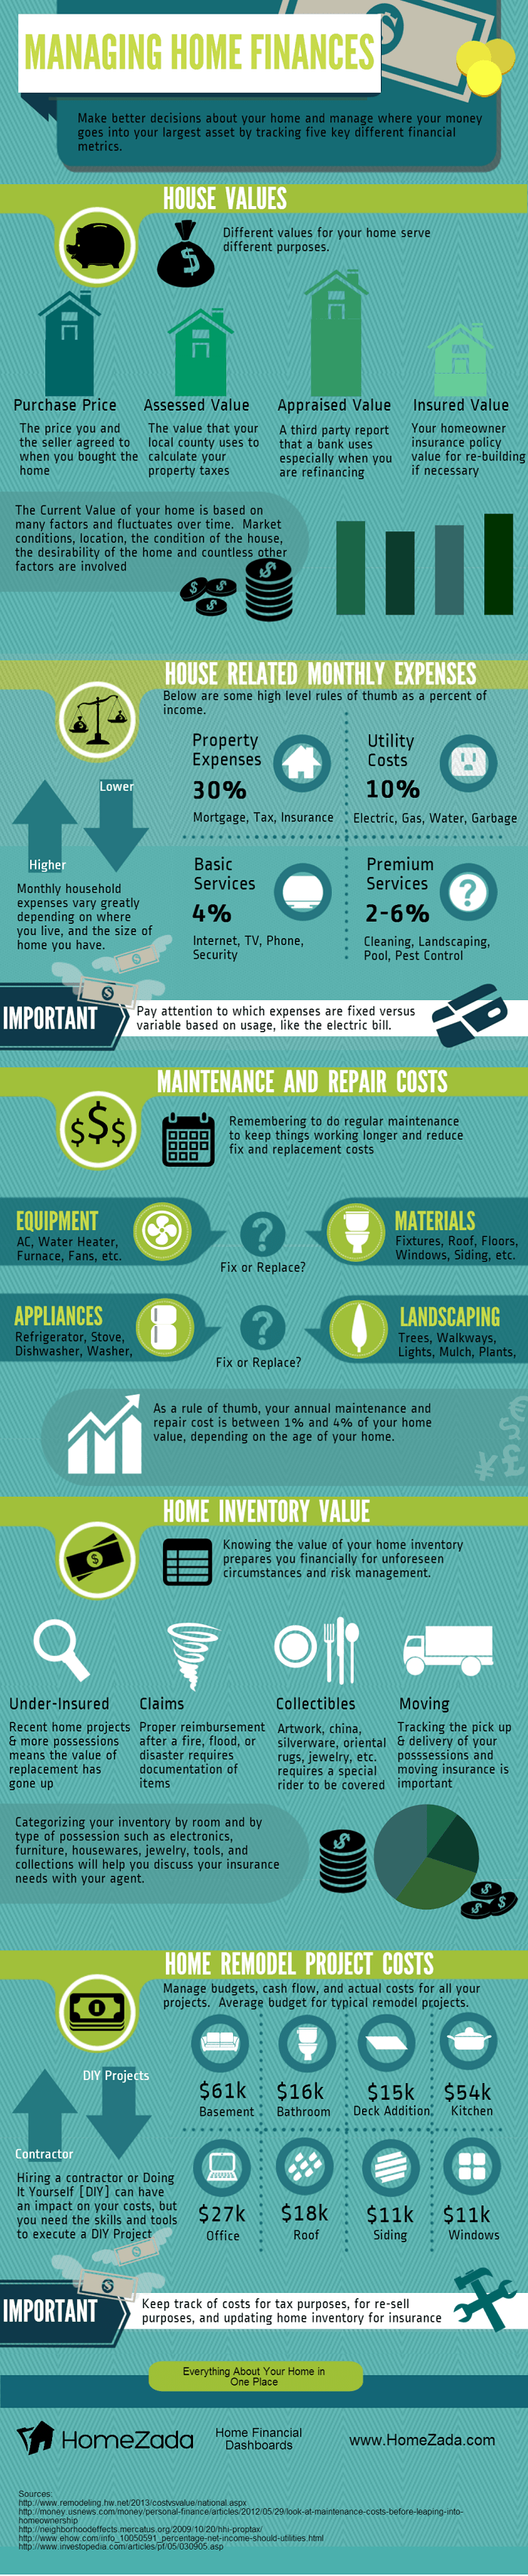 Managing Home Finances infographic